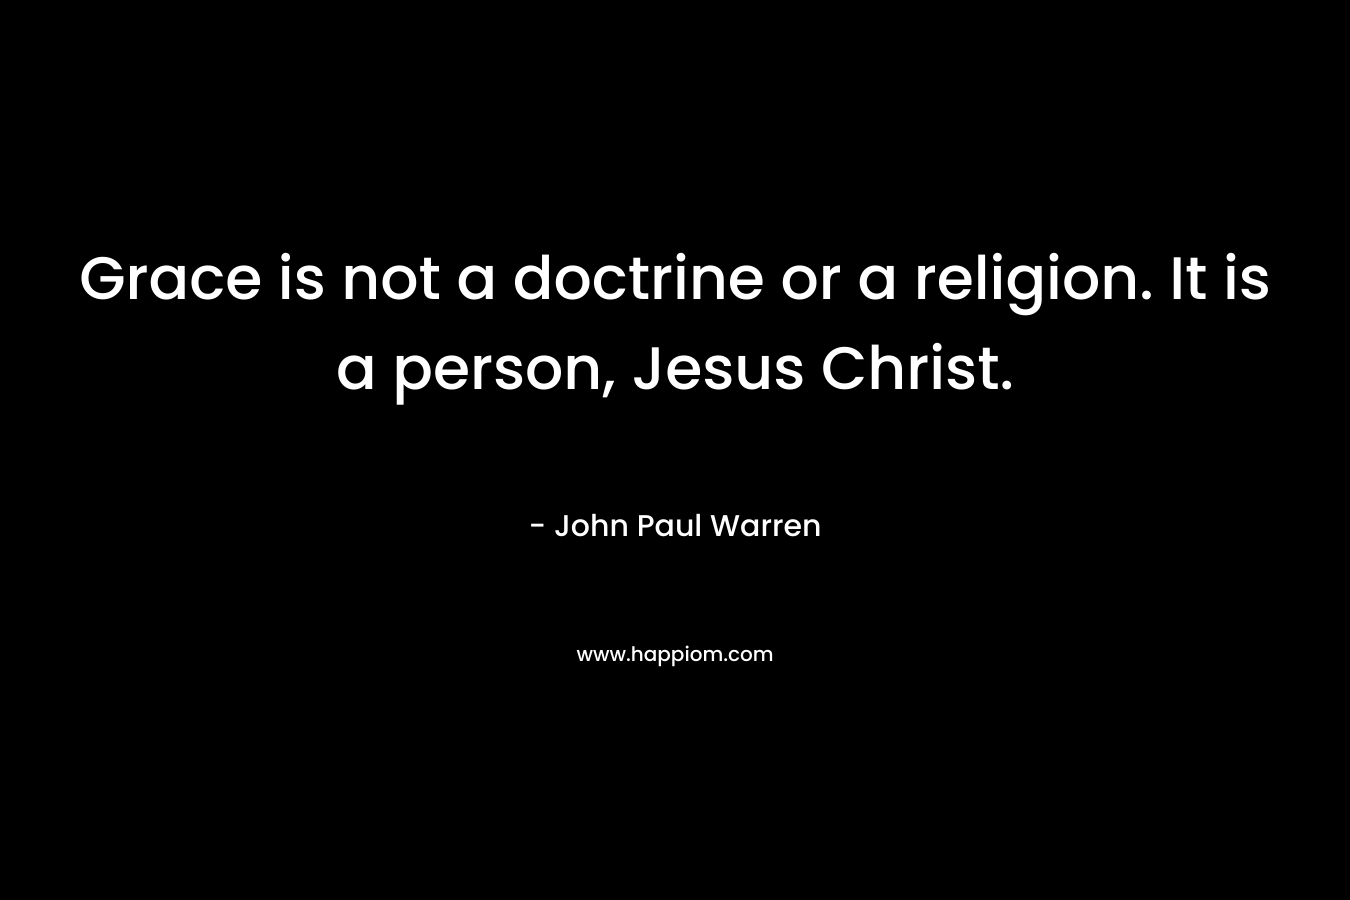 Grace is not a doctrine or a religion. It is a person, Jesus Christ.